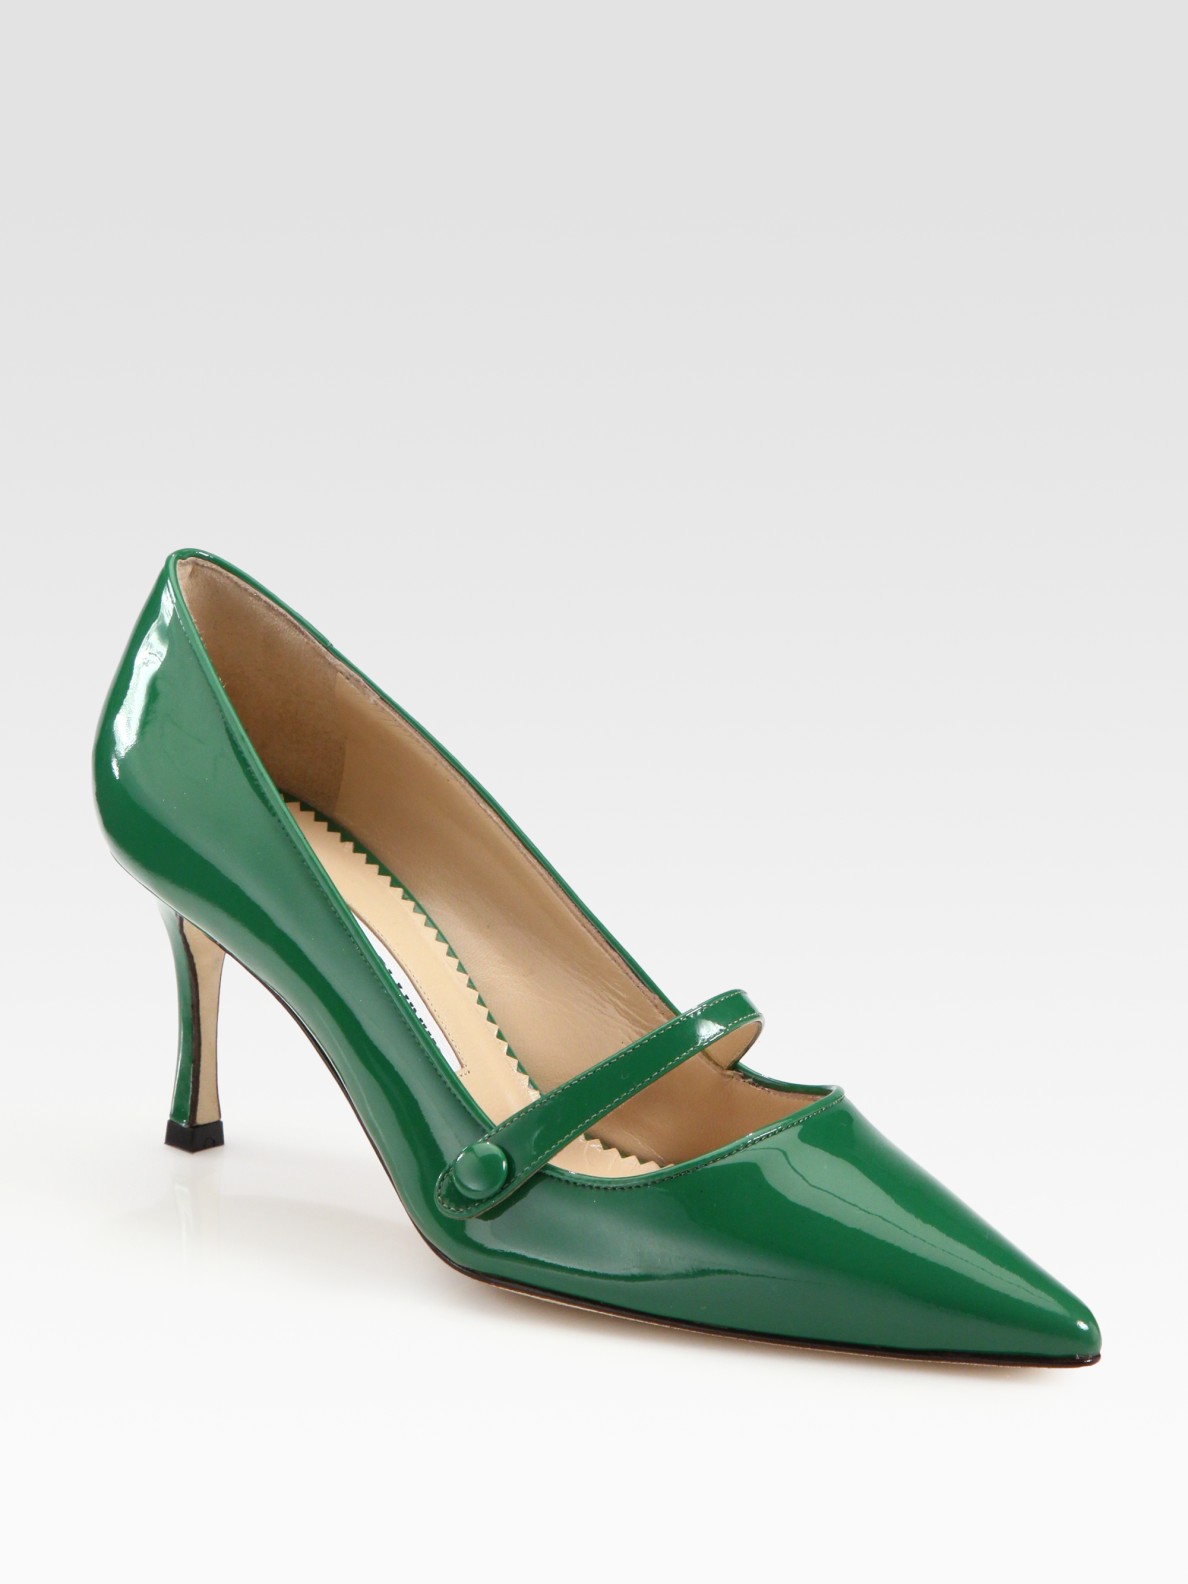 Manolo Blahnik Patent Leather Point Toe Mary Jane Pumps in Green | Lyst